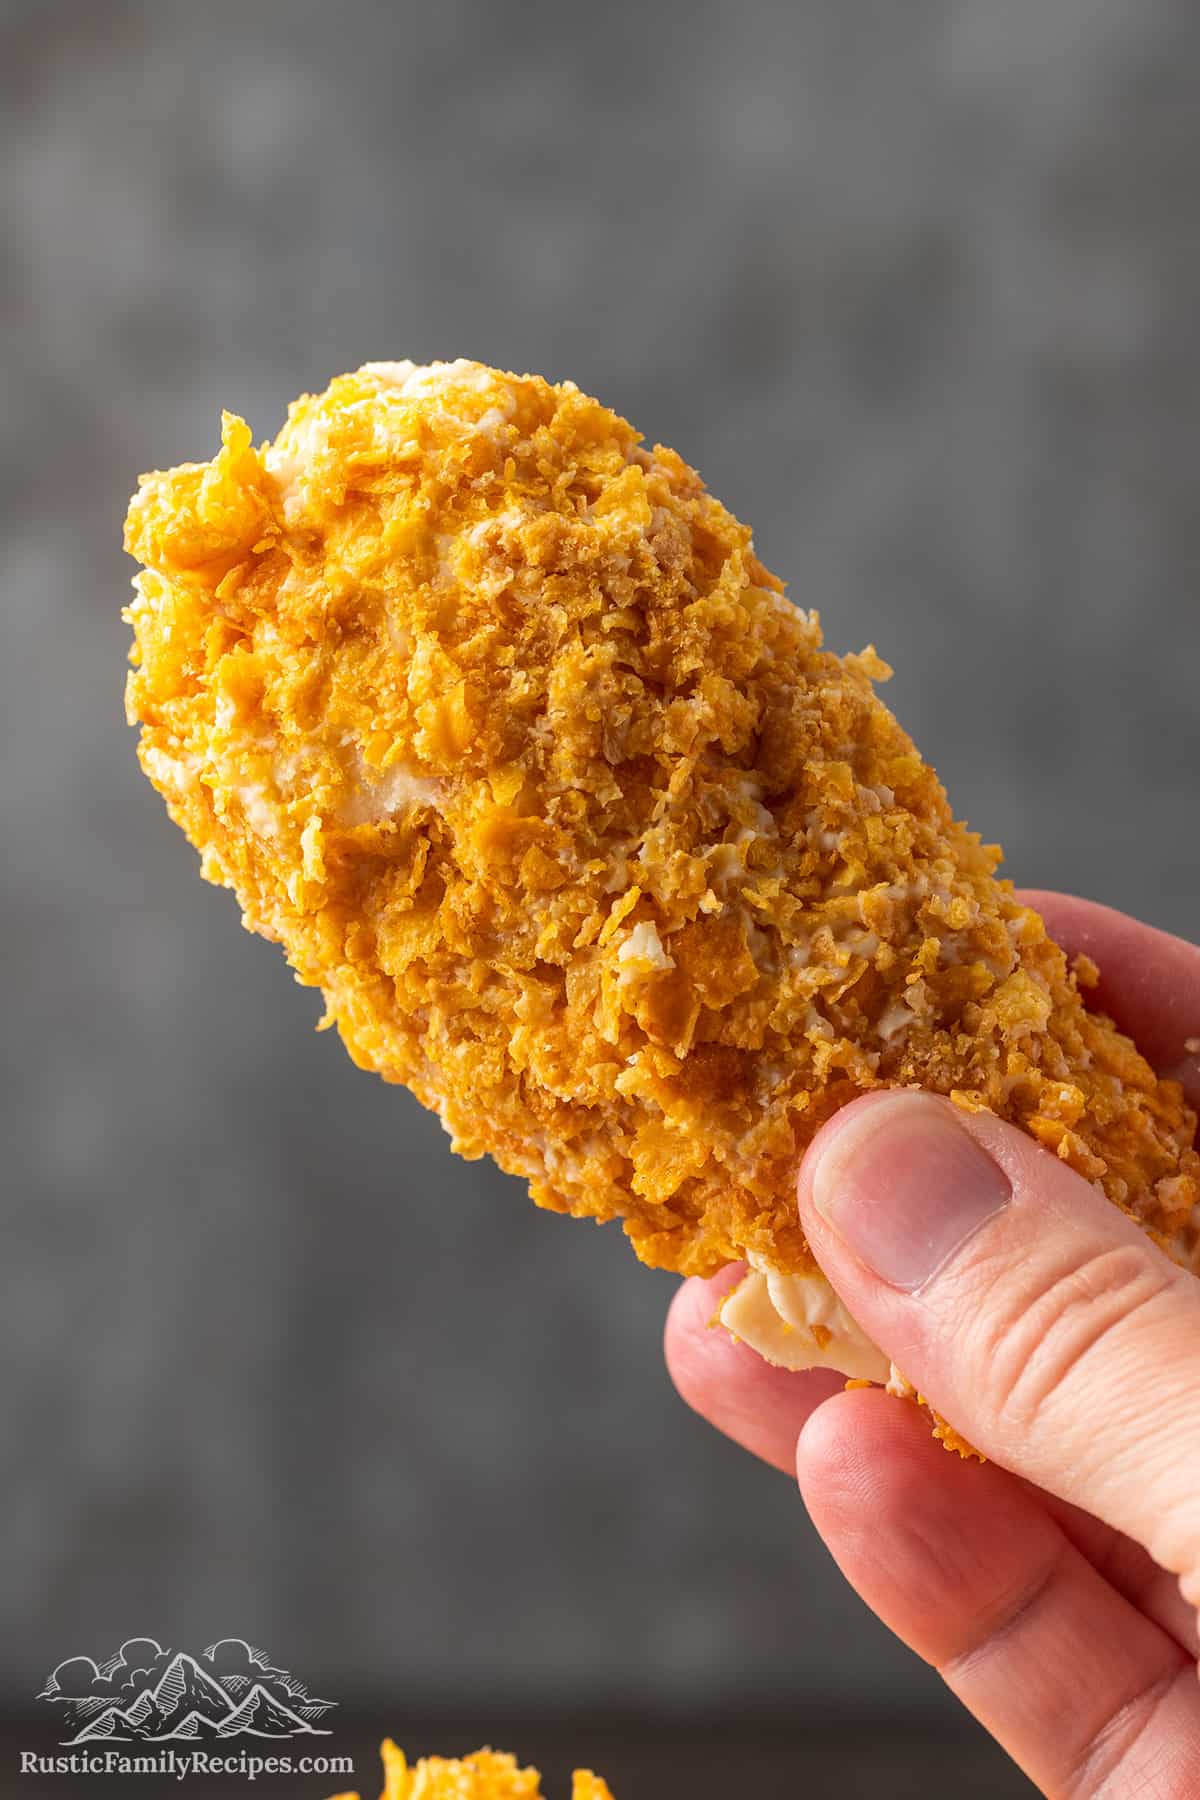 A hand holding a piece of Fried Chicken Ice Cream